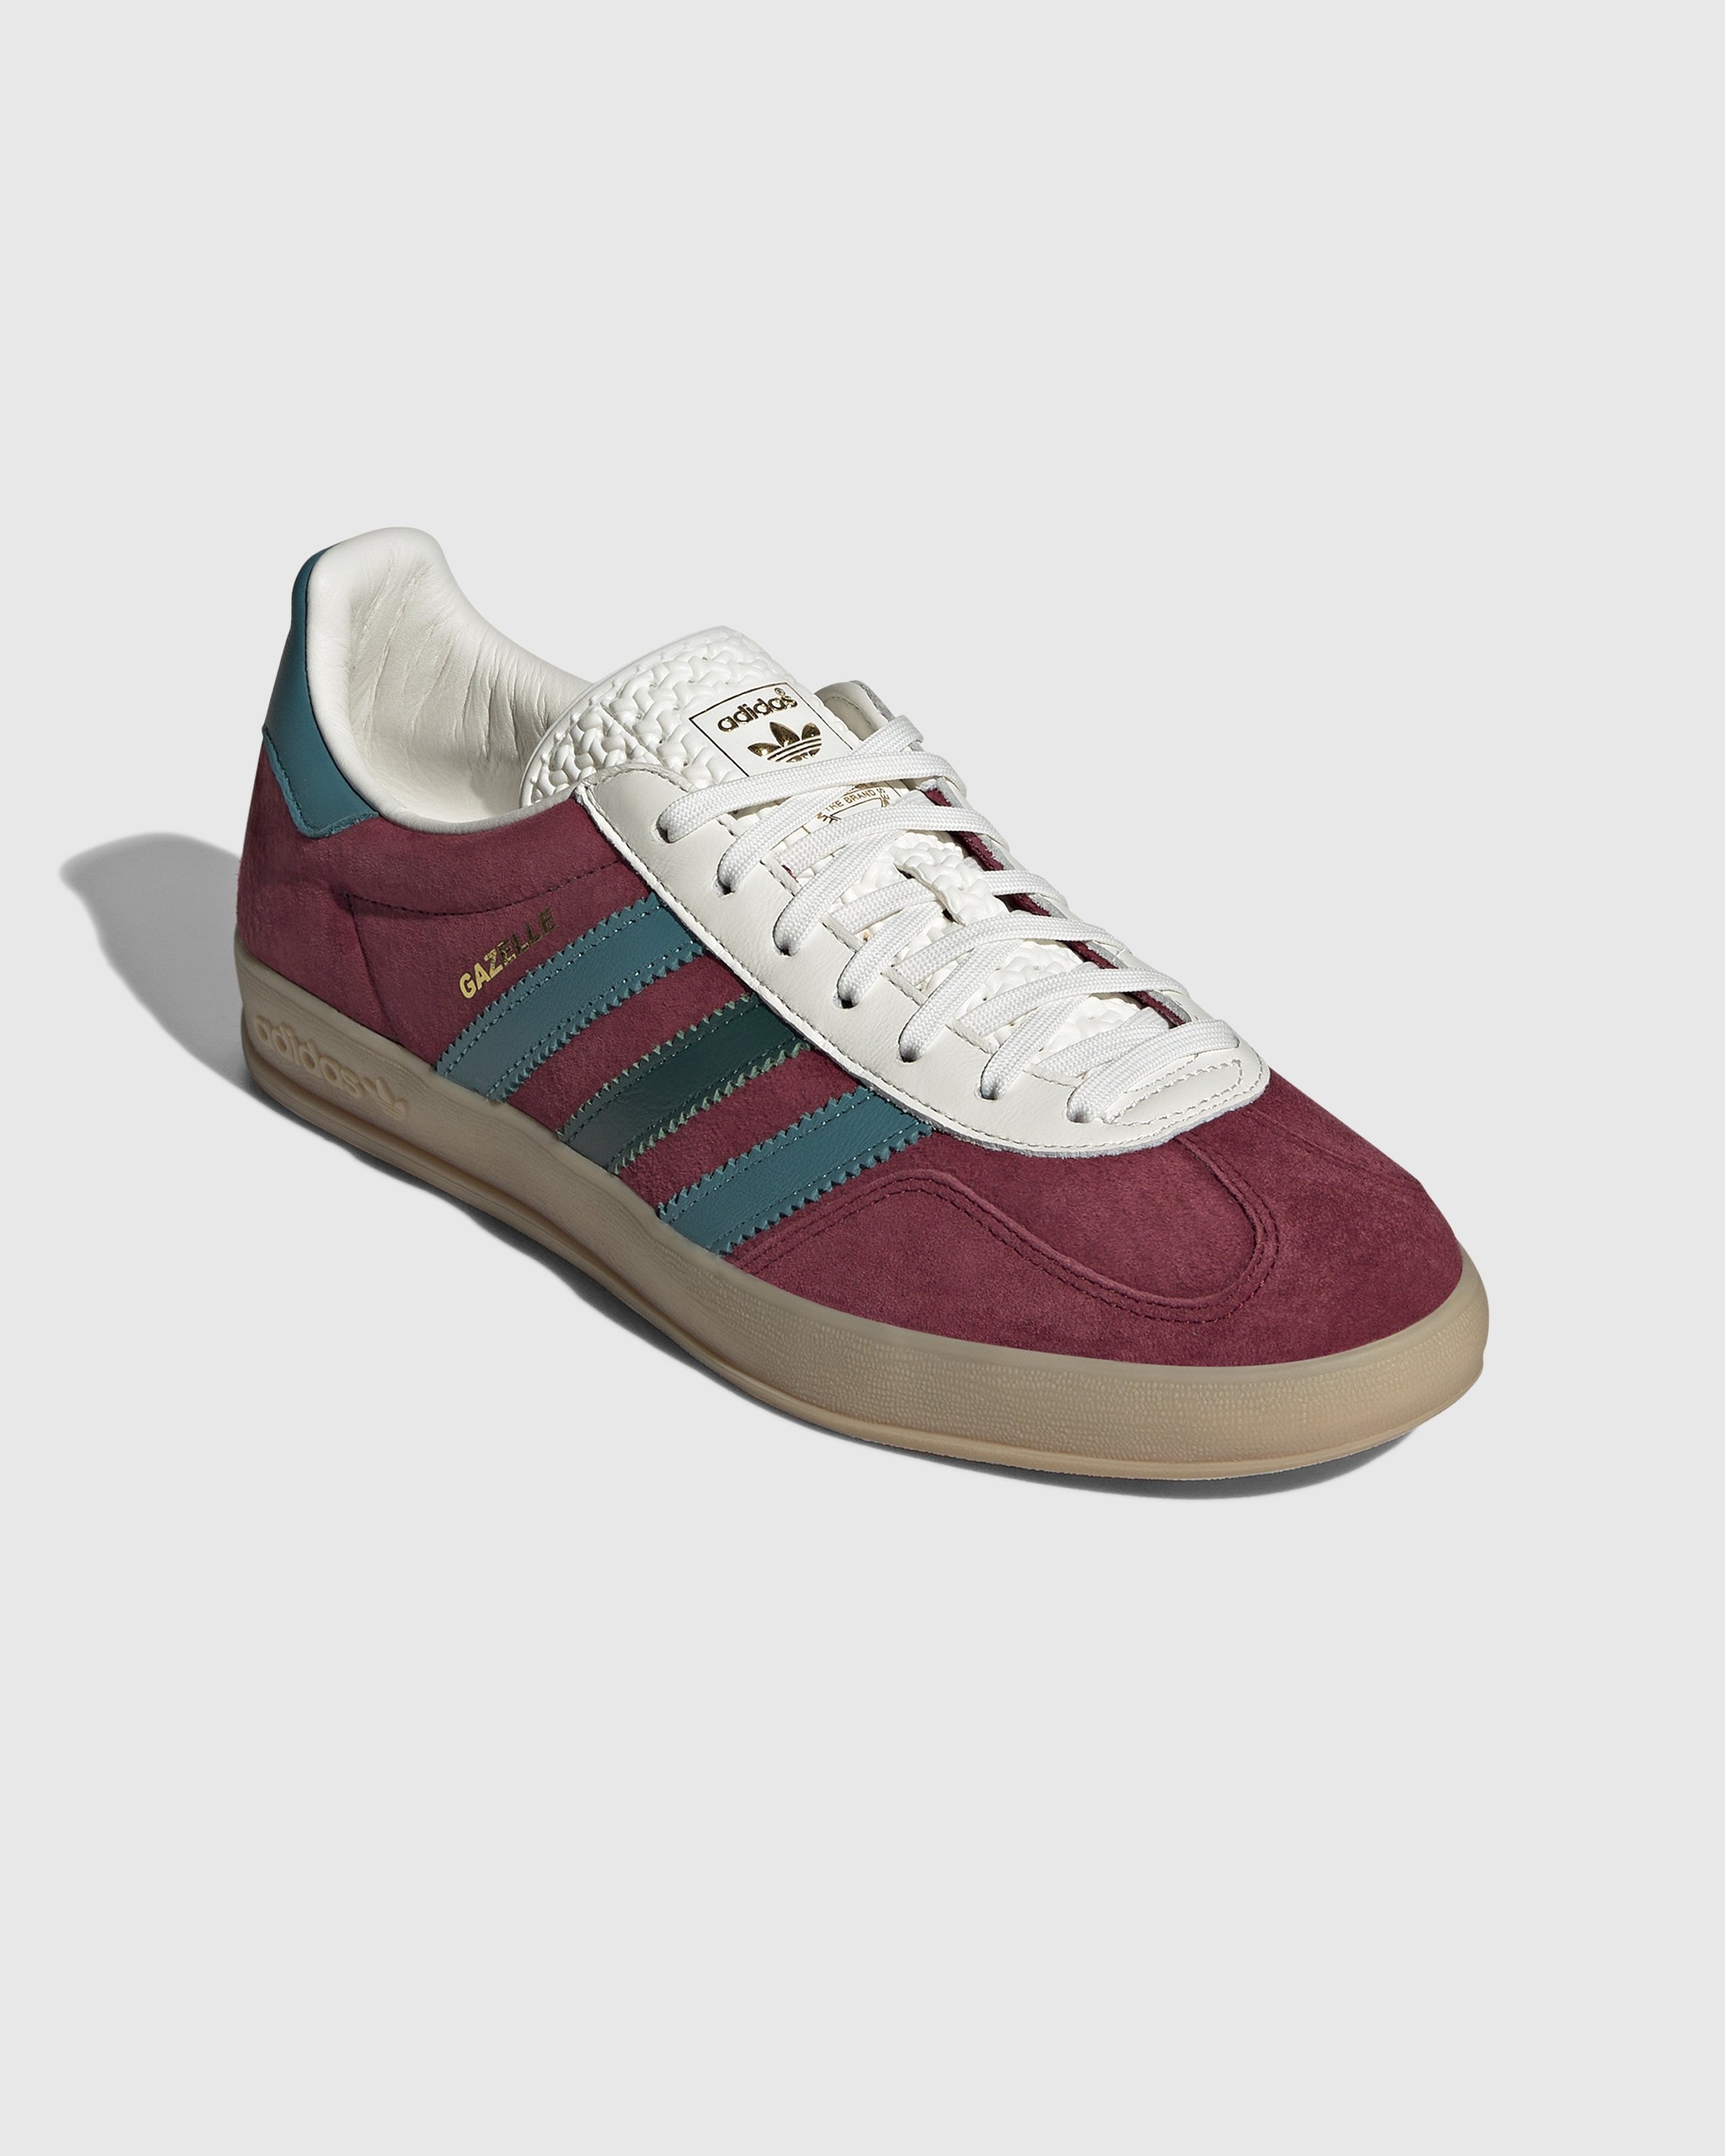 Adidas – adidas – Gazelle Core Burgundy/Green - Sneakers - Red - Image 3